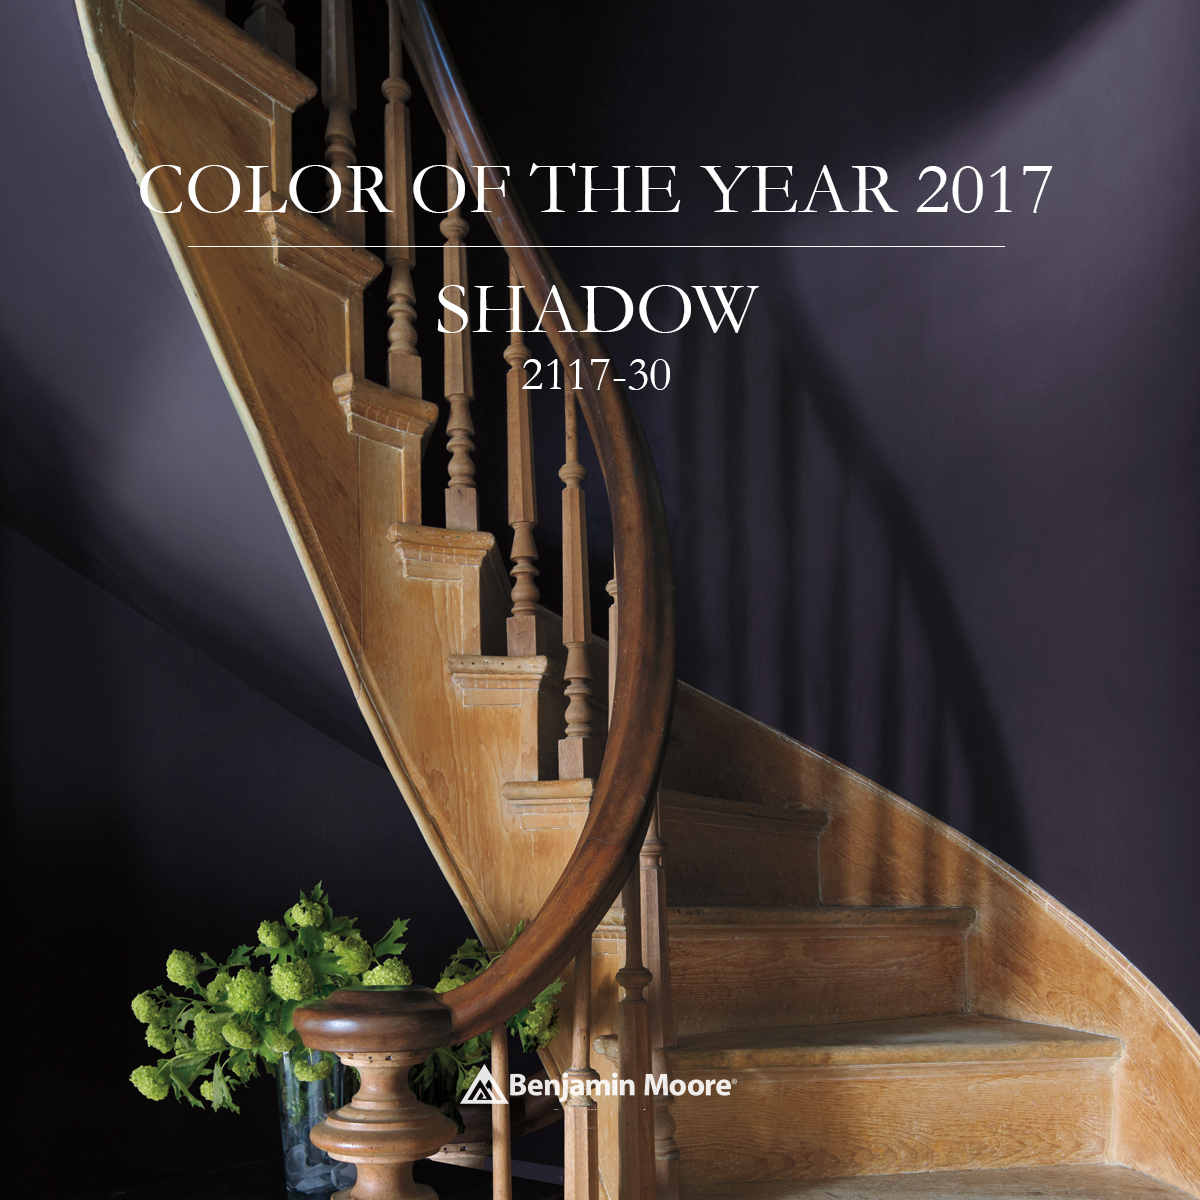 Benjamin Moore Announces 2017 Color of the Year